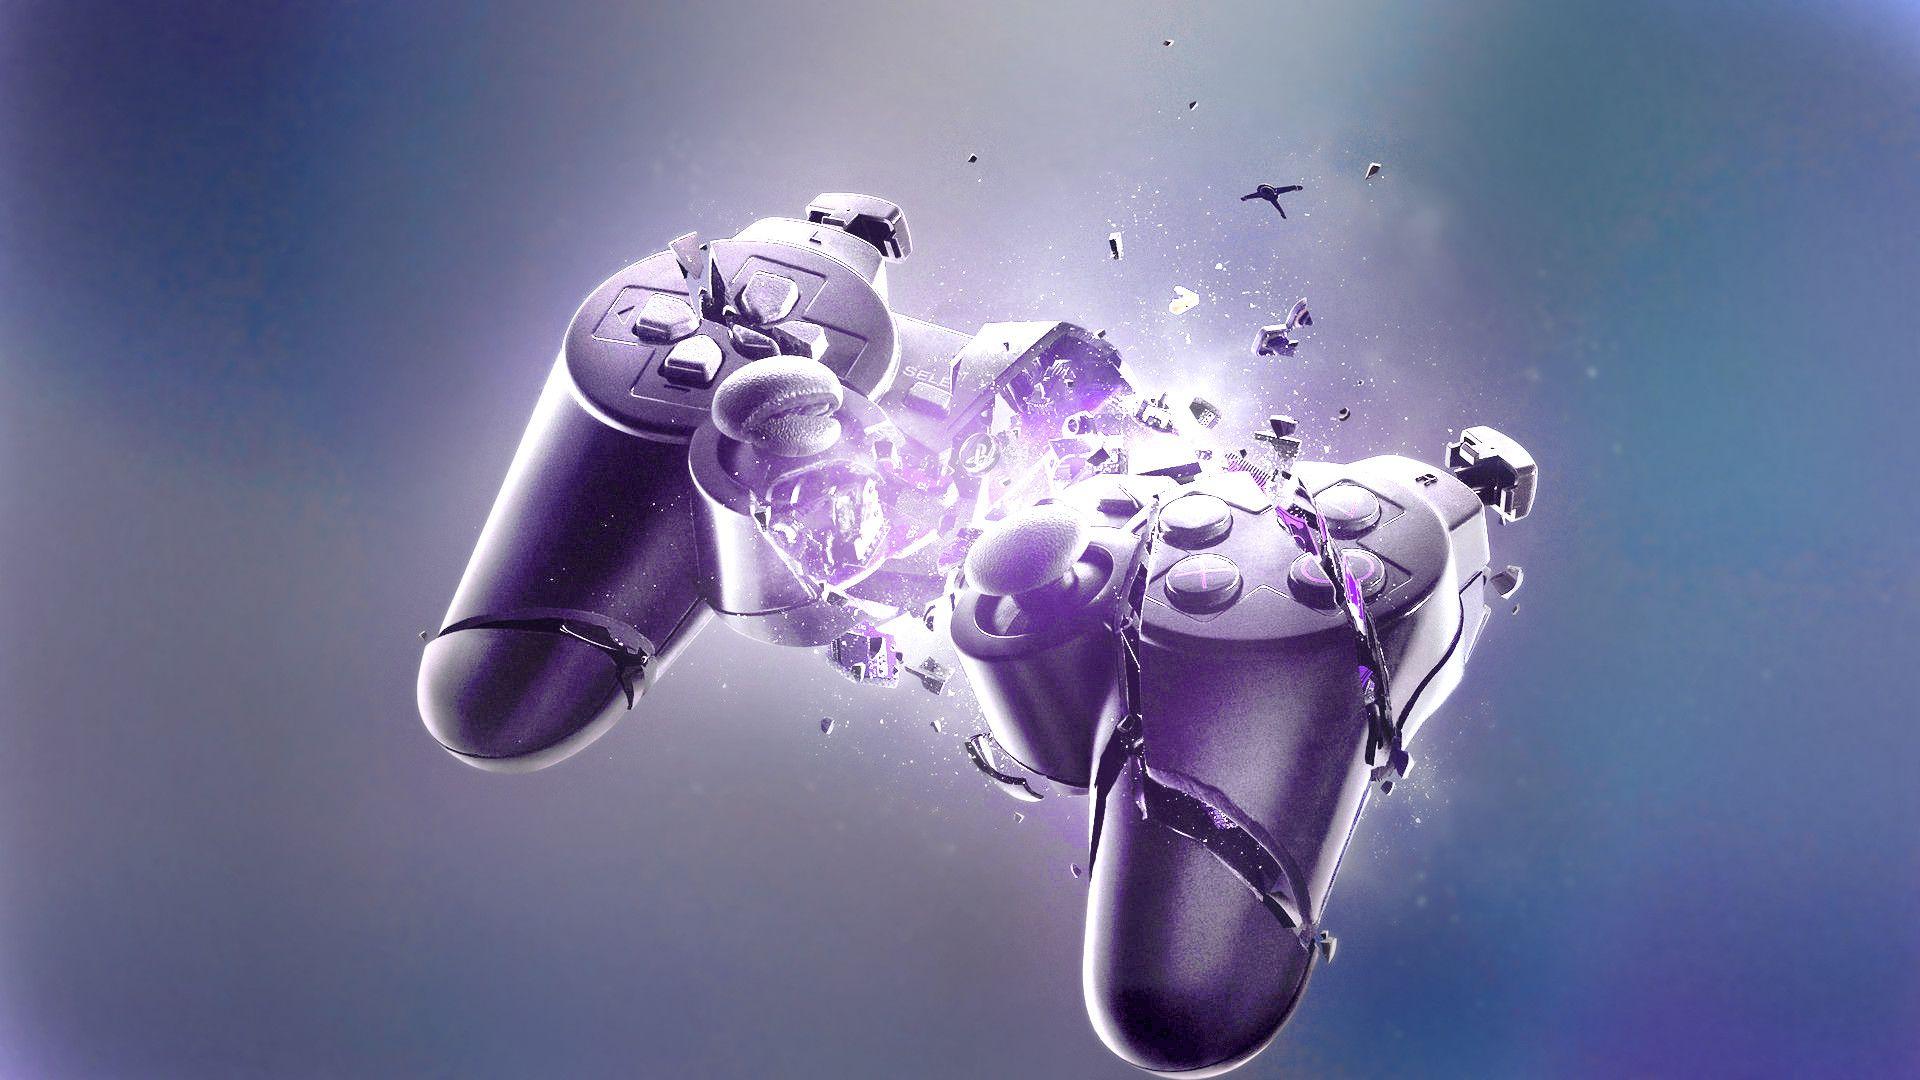 Purple Aesthetic Ps4 Wallpapers - Wallpaper Cave